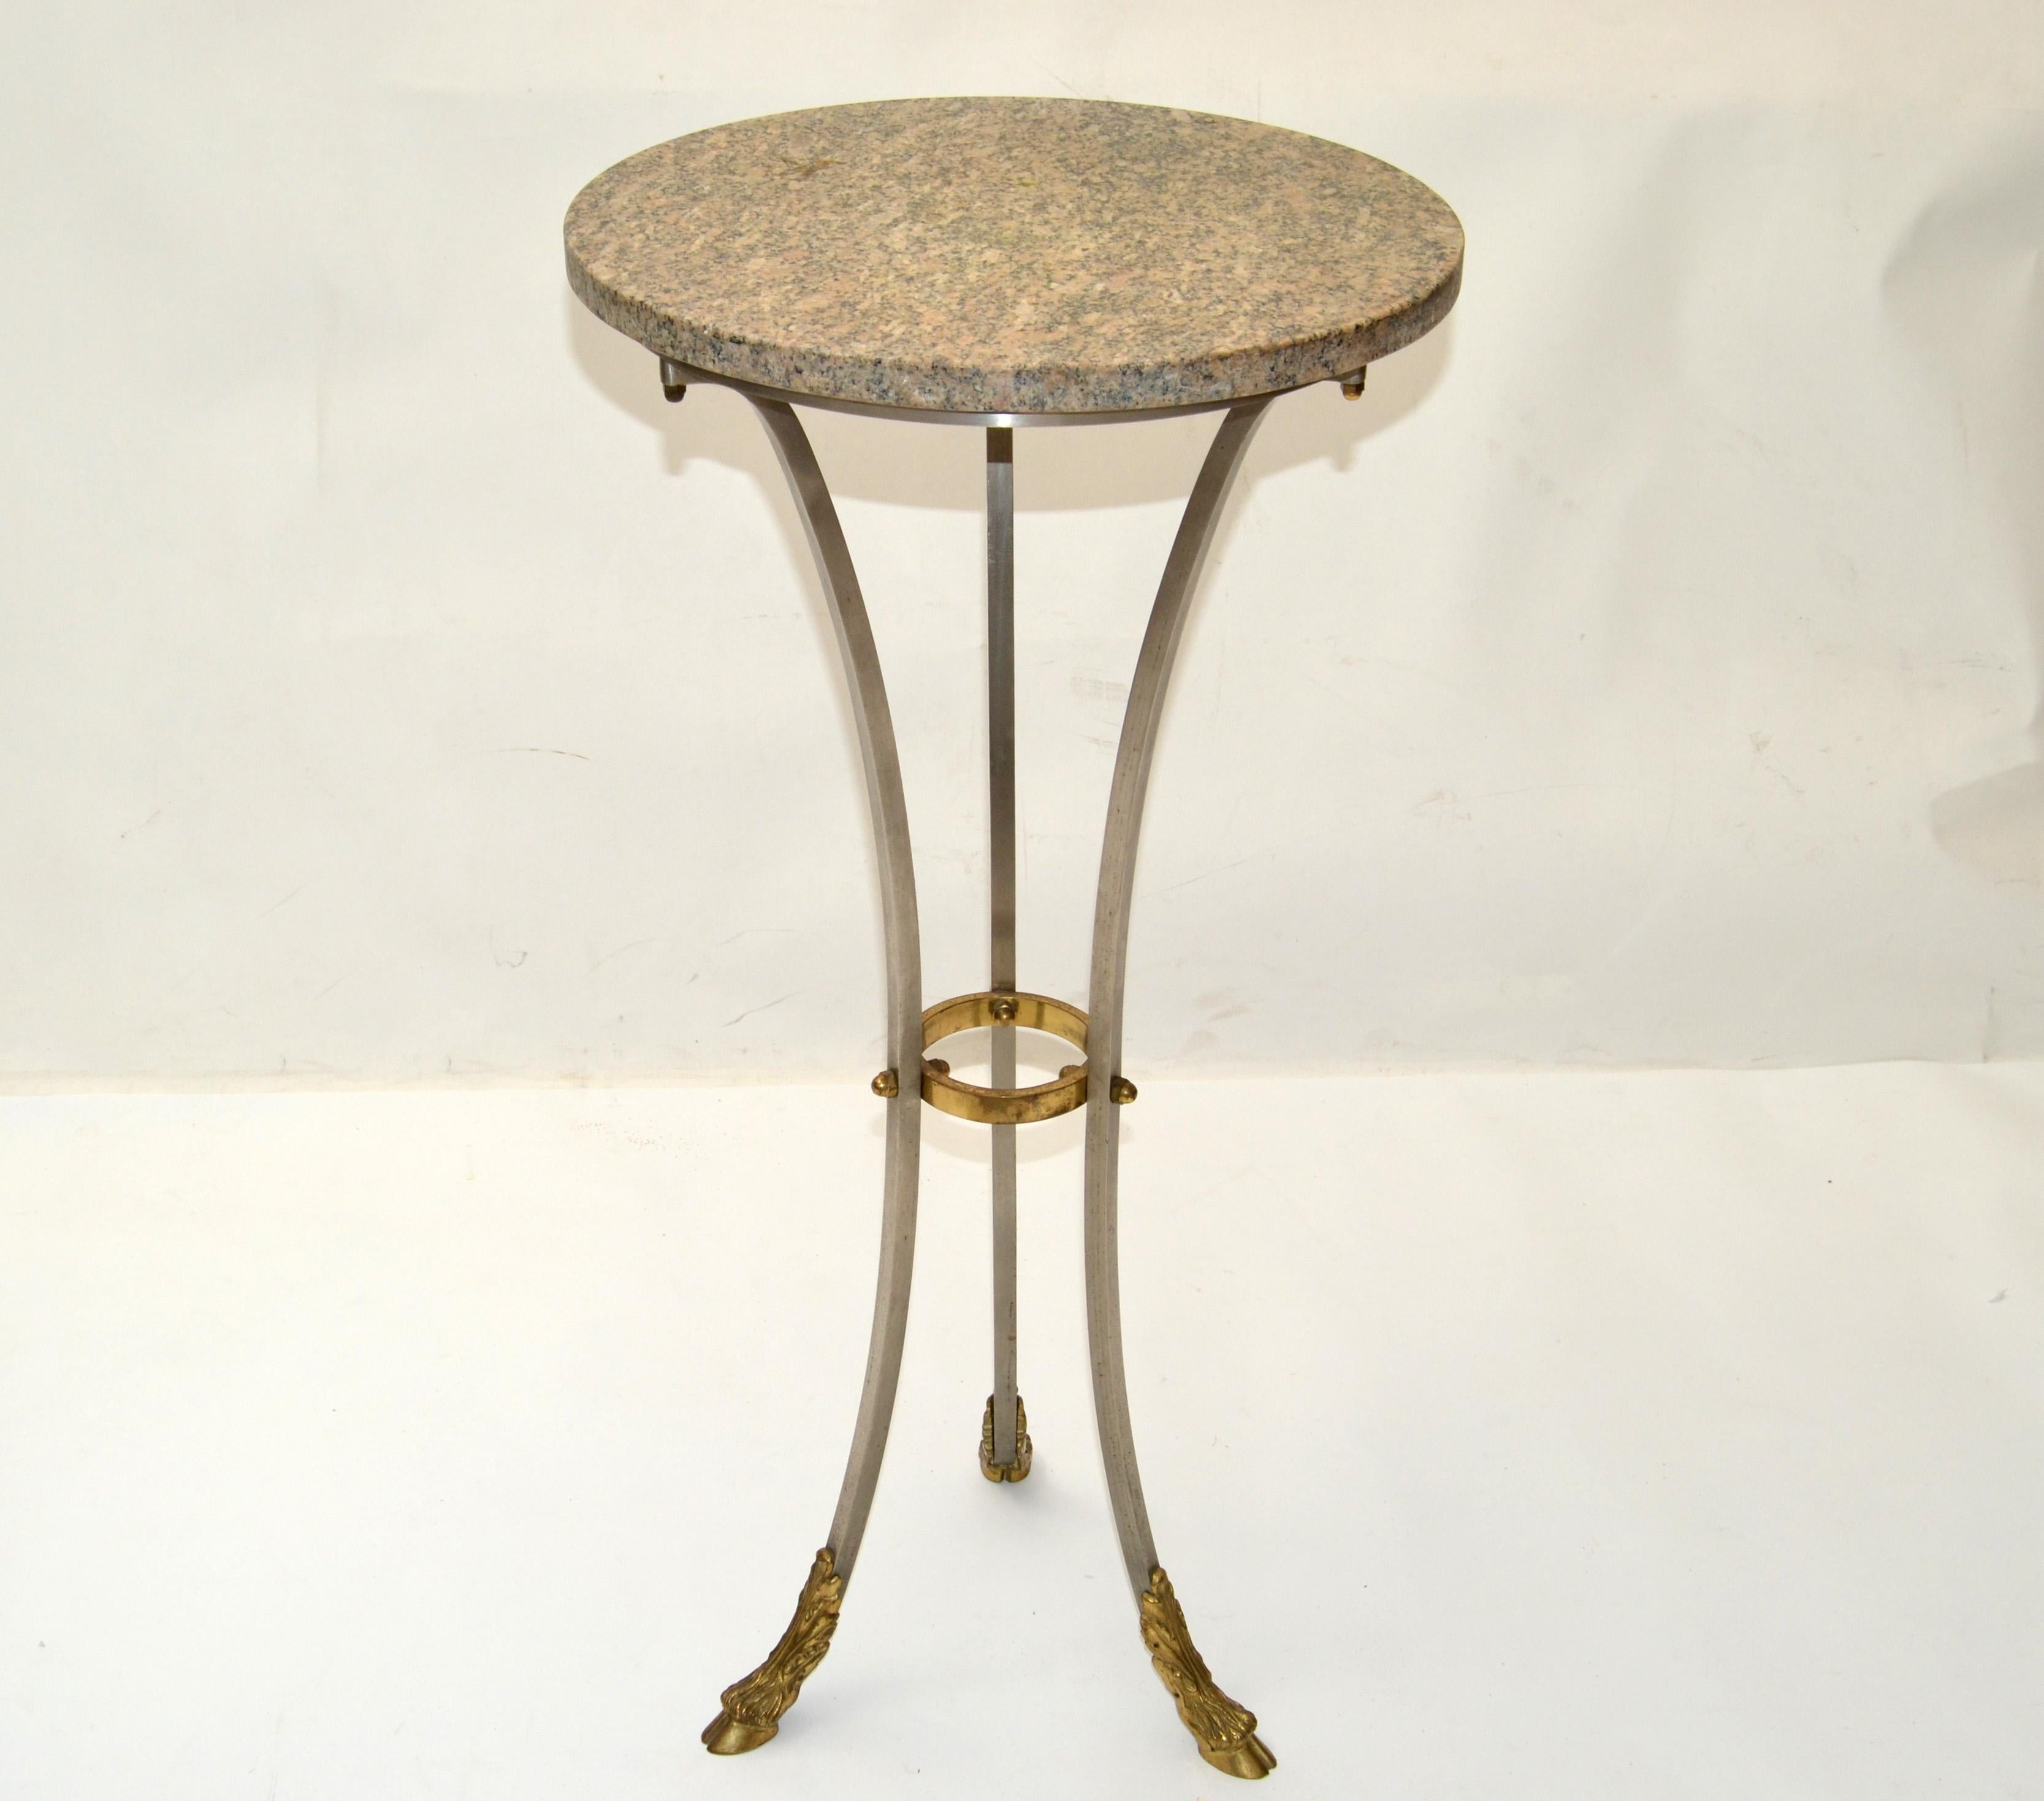 Neoclassical French drink table maison jansen style steel, brass & bronze hoof feet with a round sand color travertine top.
The natural taupe color 1-inch-thick Stone Top gives a nice contrast to the silver hue and stands firmly on the bronze